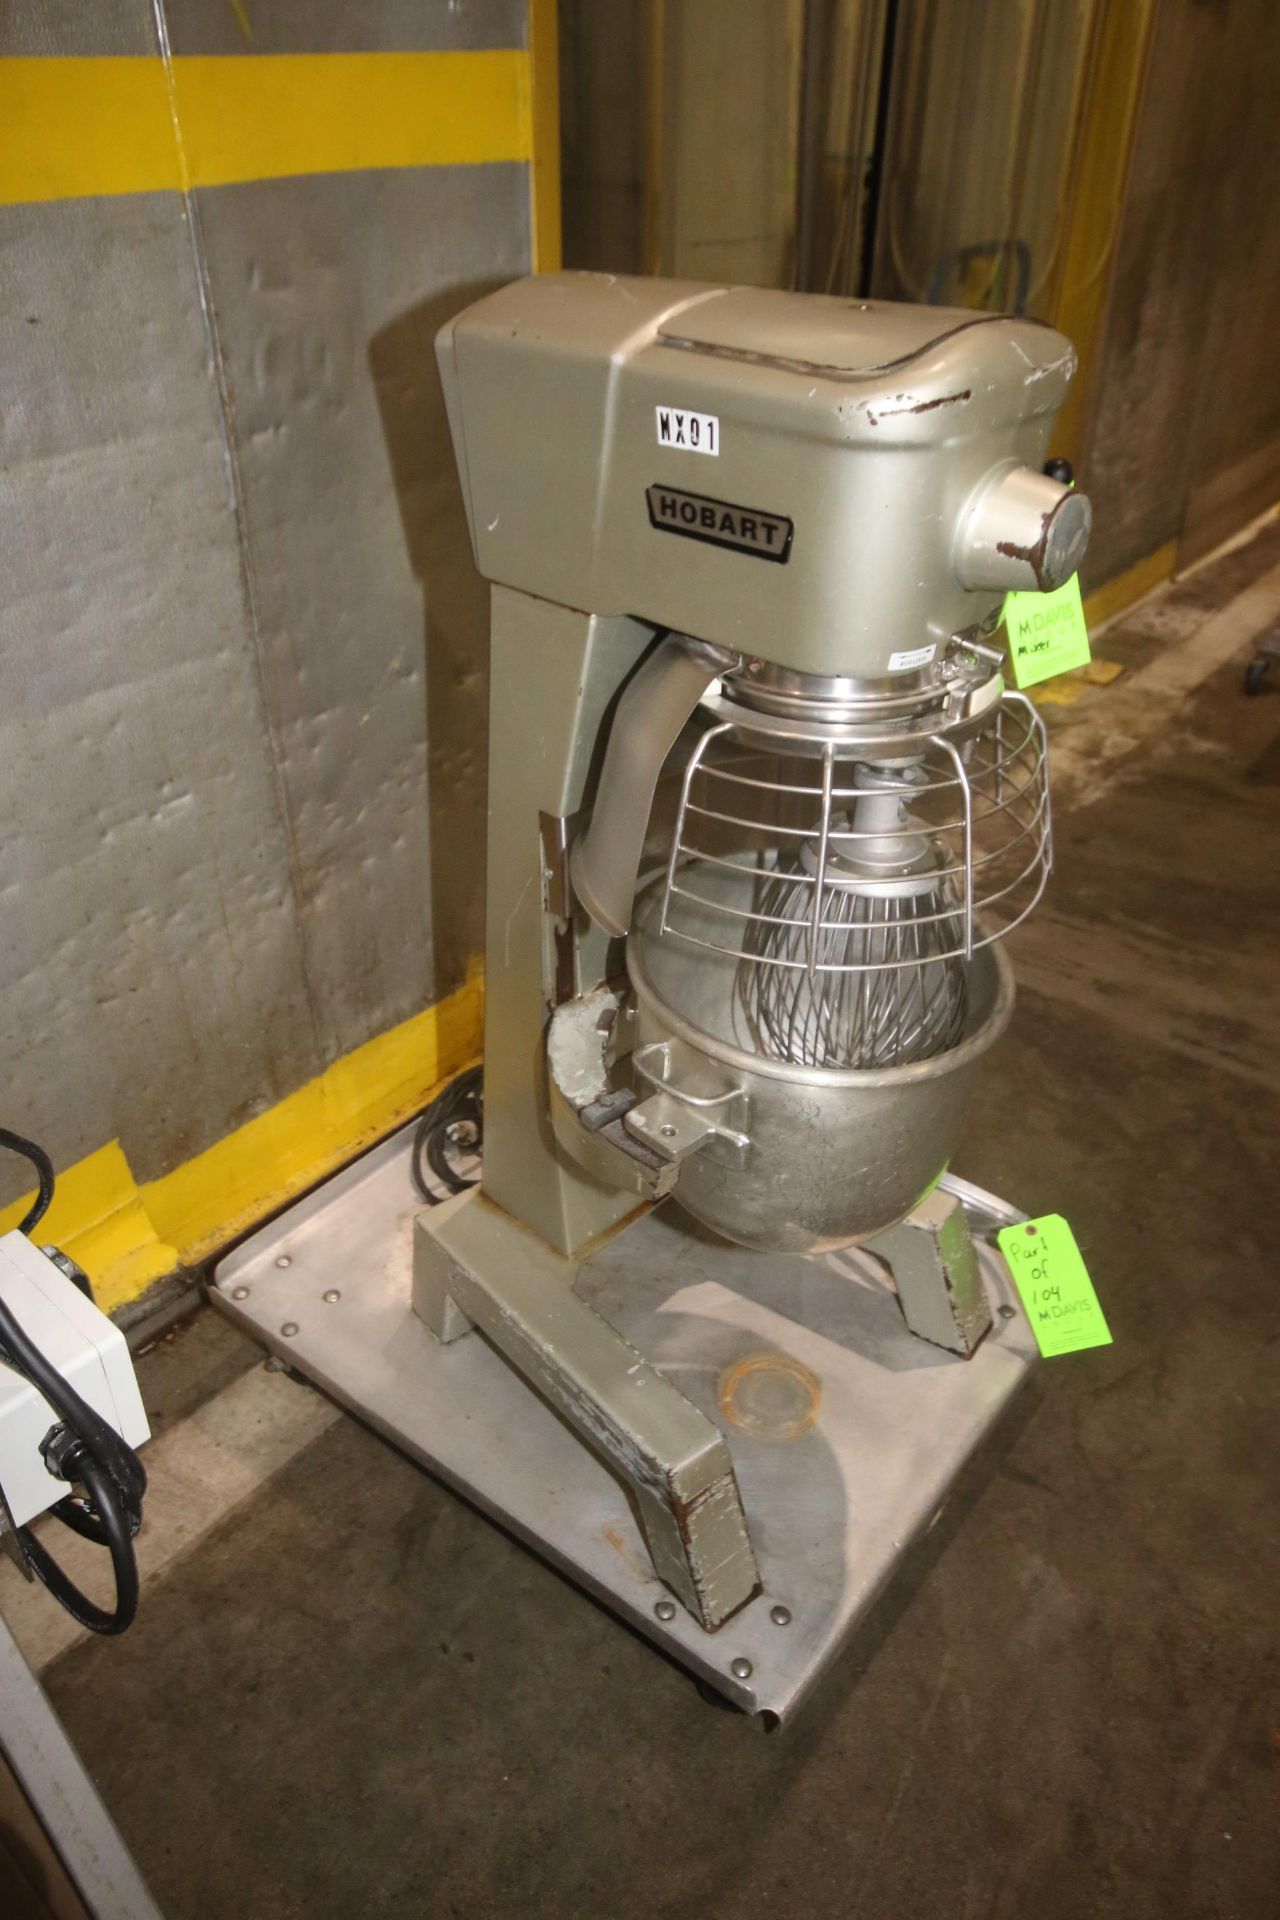 Hobart Mixer, M/N D 3001, S/N 11-245-583, 200 Volts, 1725 RPM, with S/S Mixing Bowl, Includes Whip - Image 6 of 8